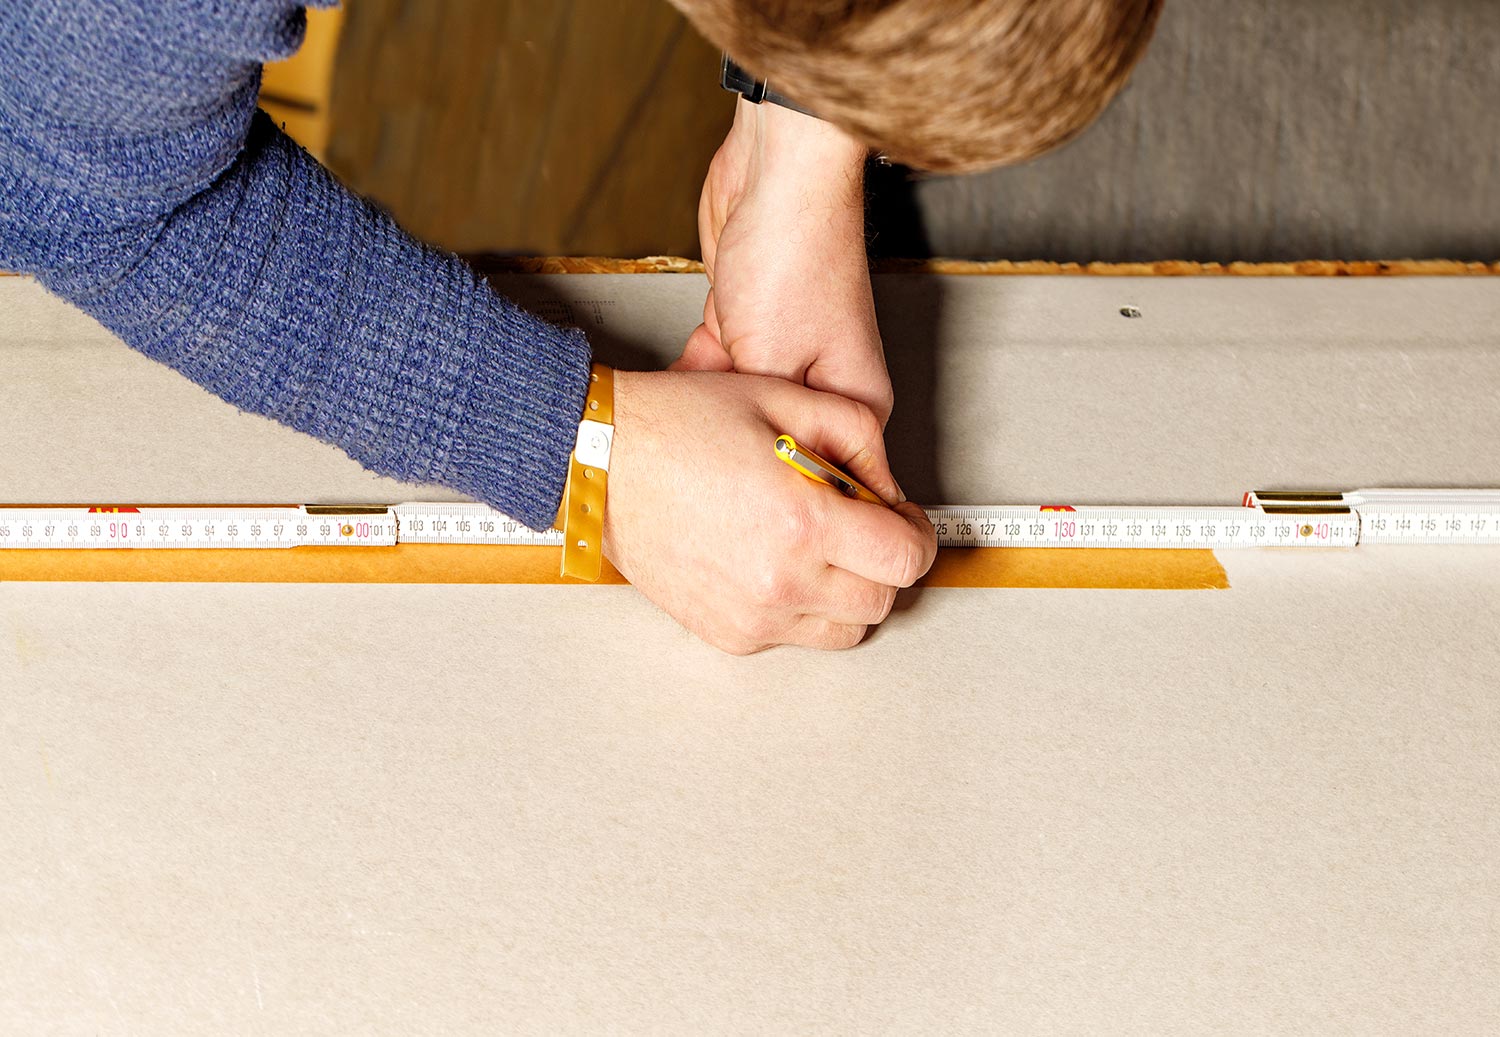 Worker mark out a sheet of drywall with a pencil